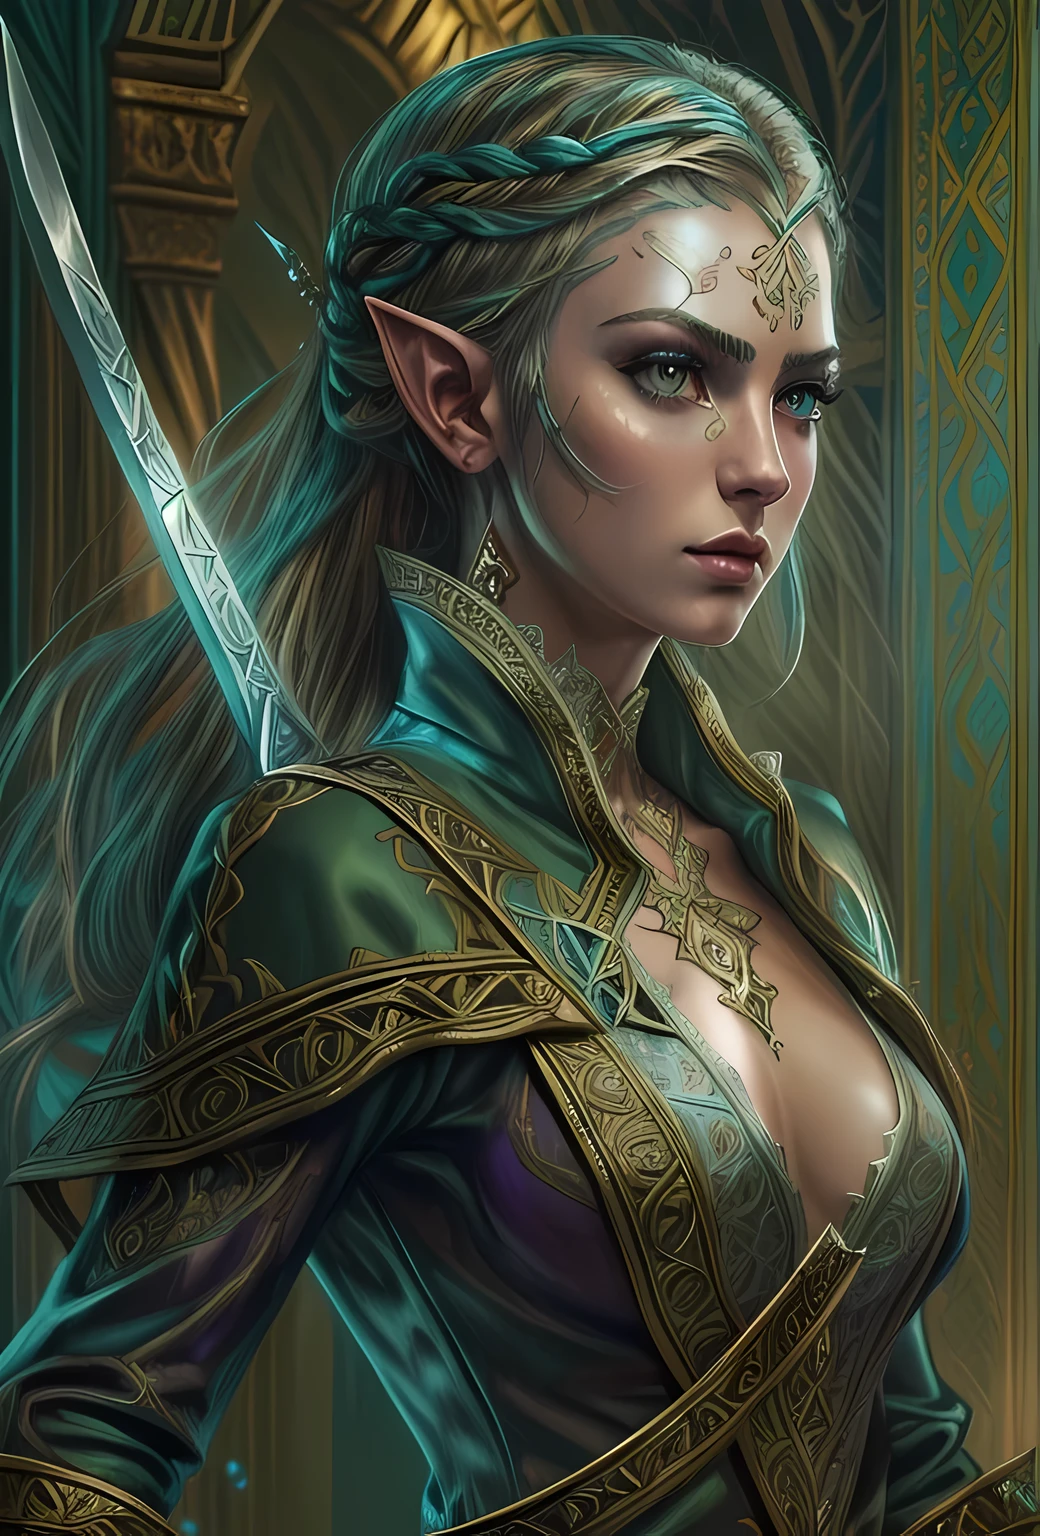 speedpainting a picture of a female elf (intense details, Masterpiece, best quality: 1.5) fantasy swashbuckler, fantasy fencer, armed with a slim sword, shinning sword, metallic shine, colorful clothes, dynamic clothing, an ultra wide shot, full body (intense details, Masterpiece, best quality: 1.5)epic beautiful female elf (intense details, Masterpiece, best quality: 1.5), rich hair, braided hair, small pointed ears, Sword and shield, GLOWING SWORD [colorful magical sigils in the air],[ colorful arcane markings floating] (intricate details, Masterpiece, best quality: 1.6), holding a [sword] (intricate details, Masterpiece, best quality: 1.6) holding a [sword glowing in red light] fantasy urban street (intense details, Masterpiece, best quality: 1.5),  purple cloak, long cloak (intense details, Masterpiece, best quality: 1.5), sense of daring, sense of adventure,  high details, best quality, 8k, [ultra detailed], masterpiece, best quality, (extremely detailed), dynamic angle, ultra wide shot, photorealistic, RAW, fantasy art, dnd art, fantasy art, realistic art, fantasysword sword, 